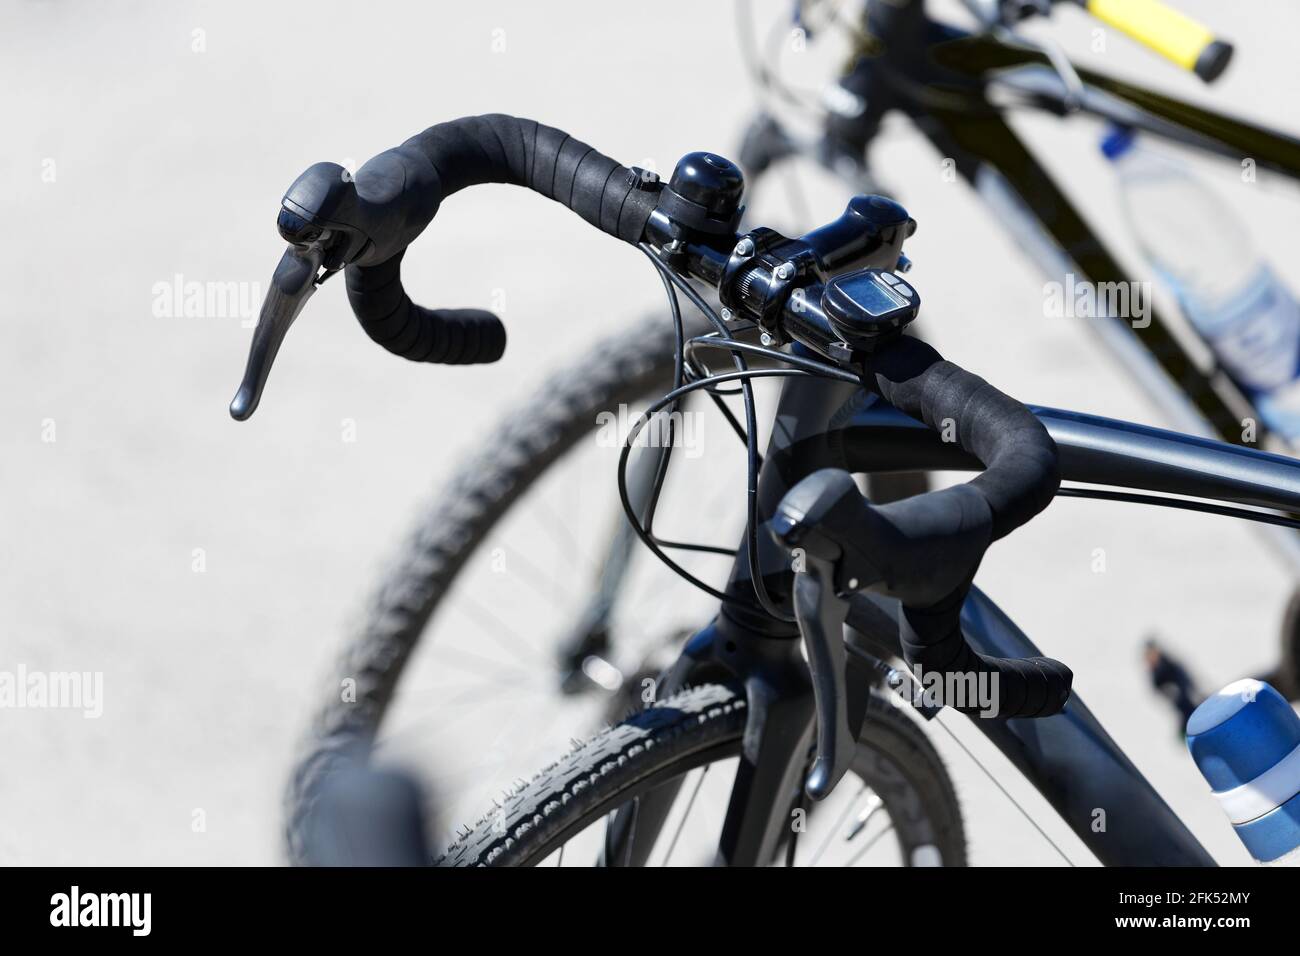 Closeup bicycle rudder with brake handles and trip computer against blurred background Stock Photo